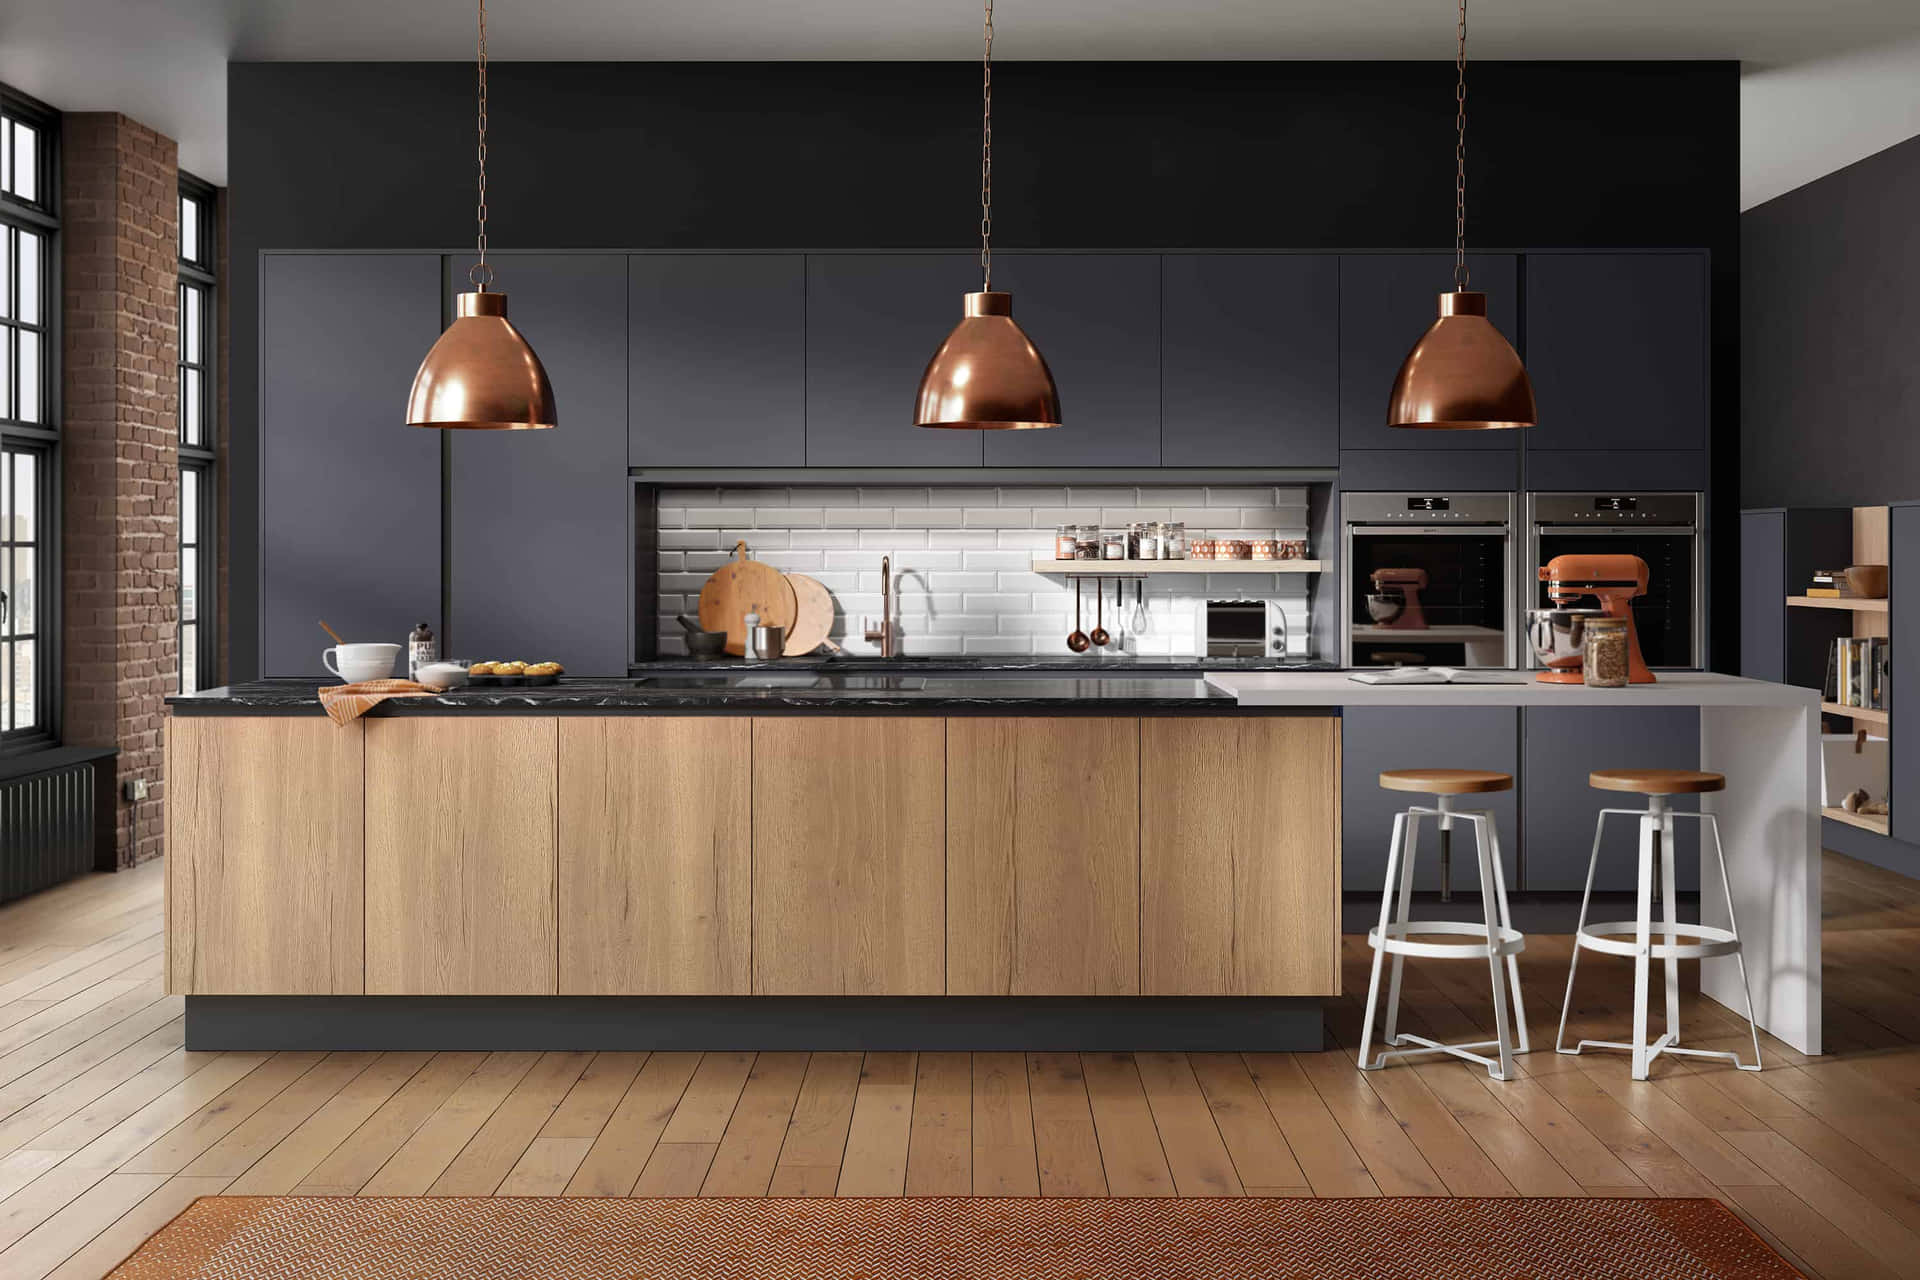 A Modern Kitchen With Dark Wood Cabinets And A Wooden Floor